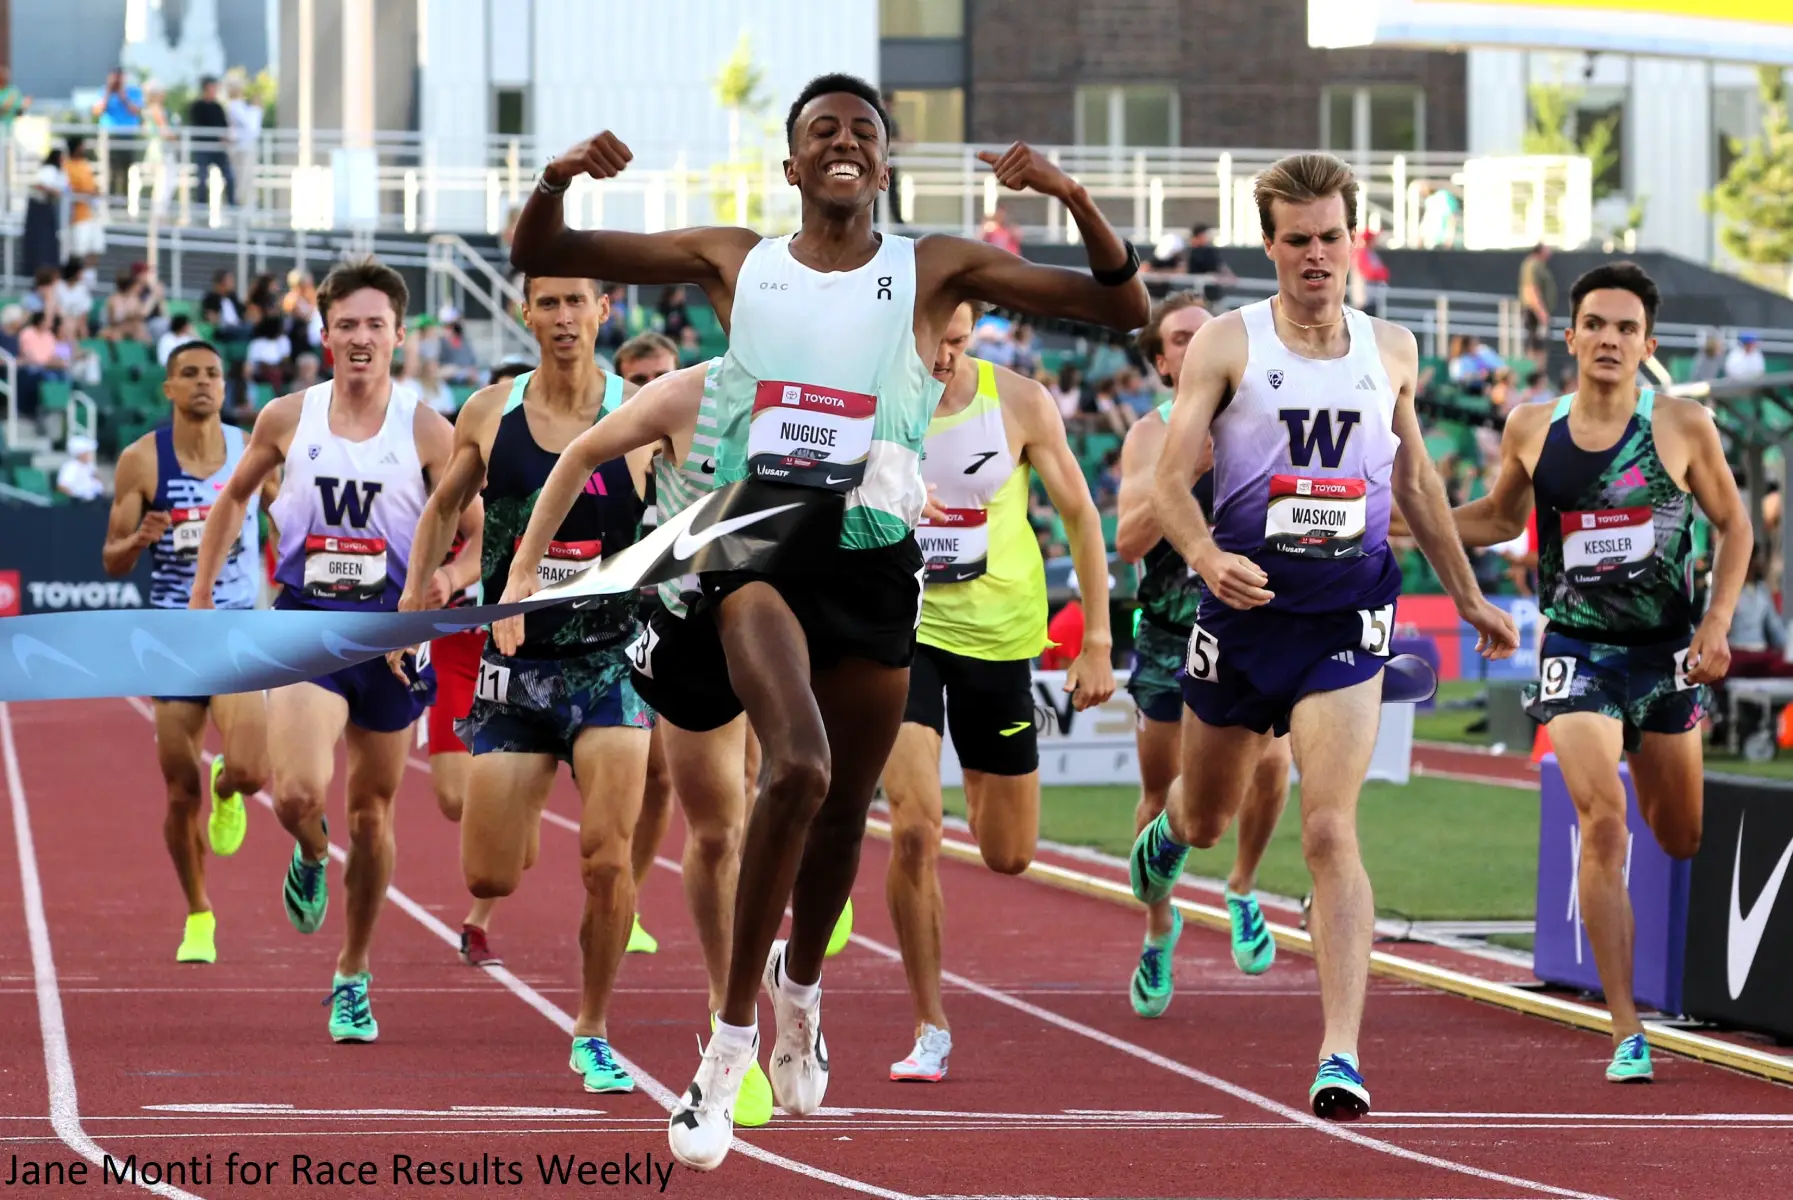 Yared Nuguse wins 1500m title with late kick at 2023 USATF Outdoor Championships